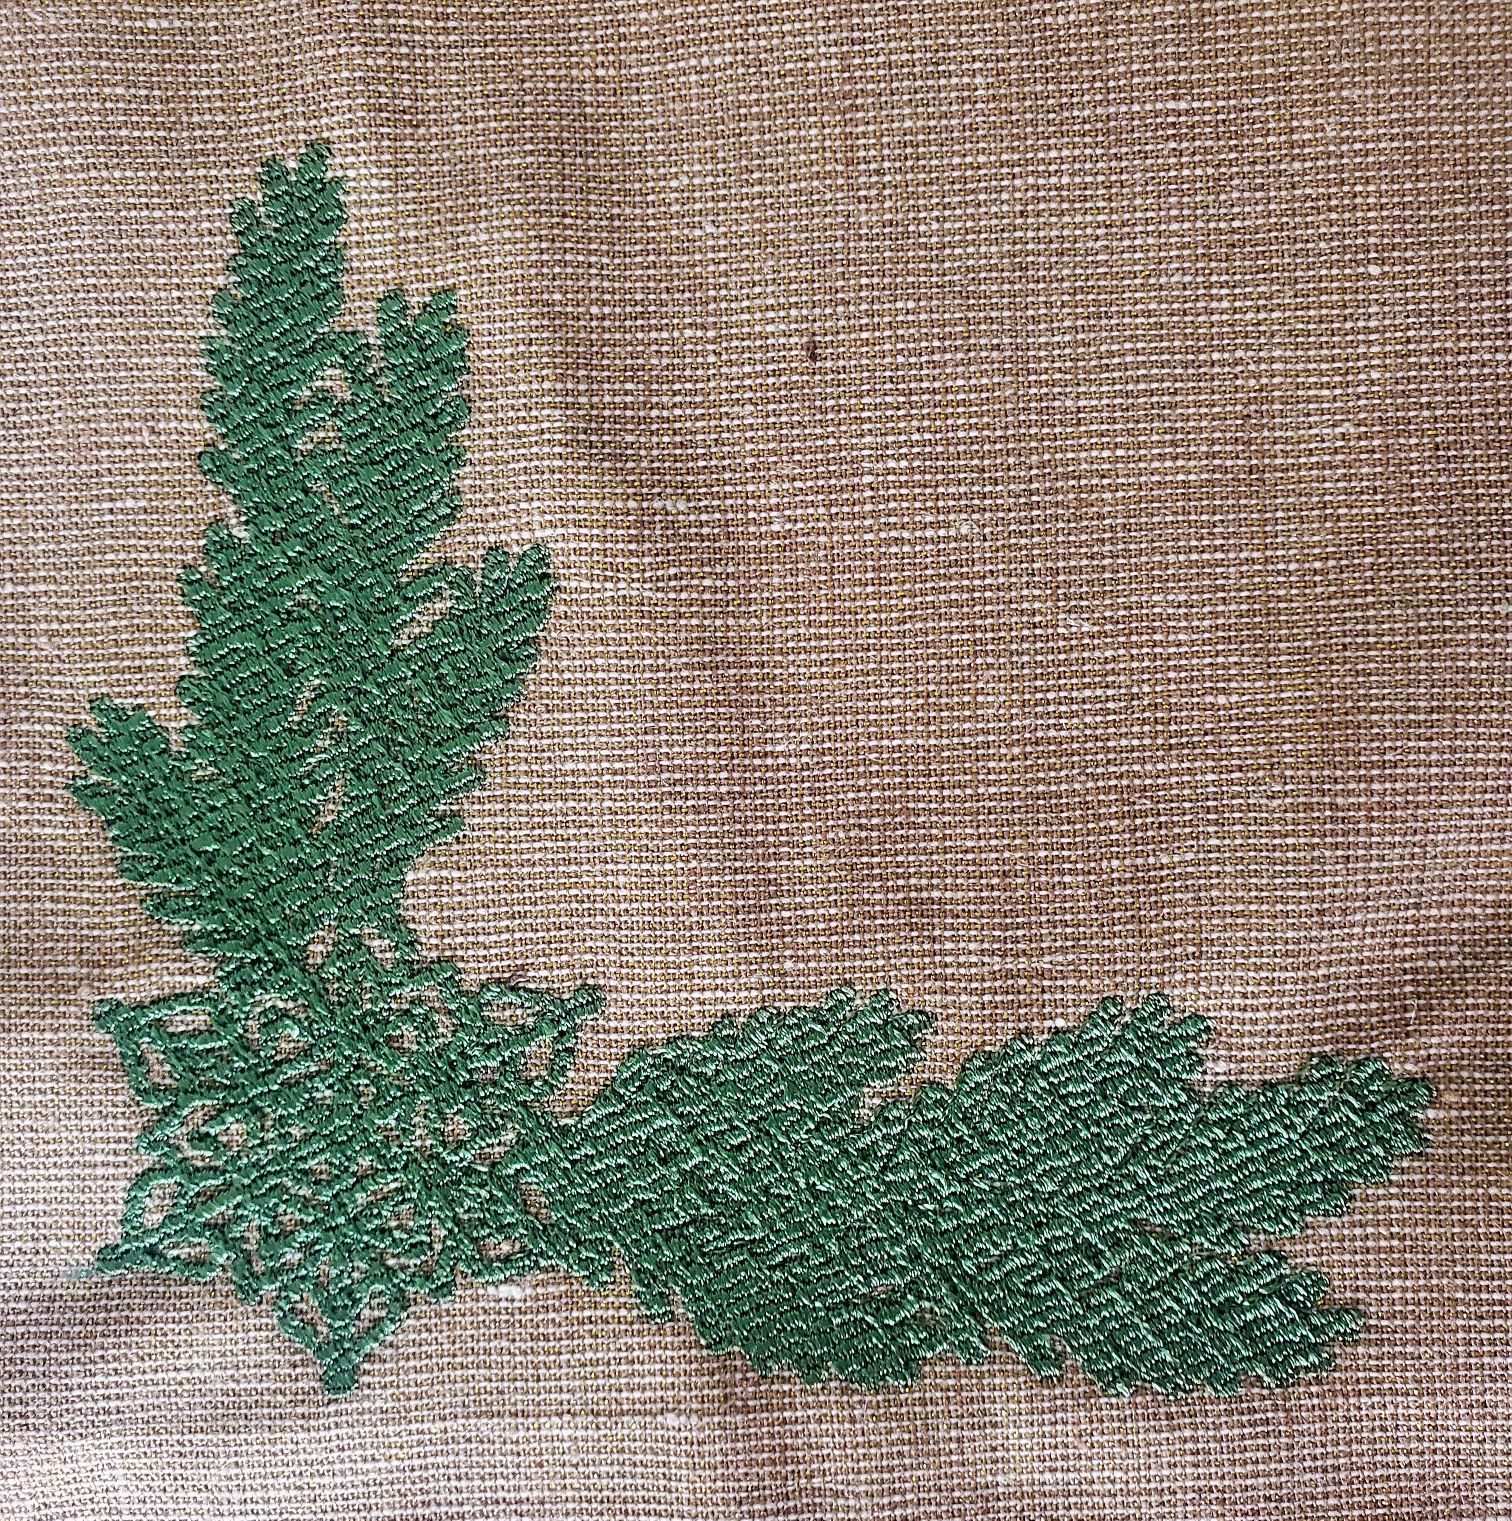 snowflake-pine-motif-filled-embroidery